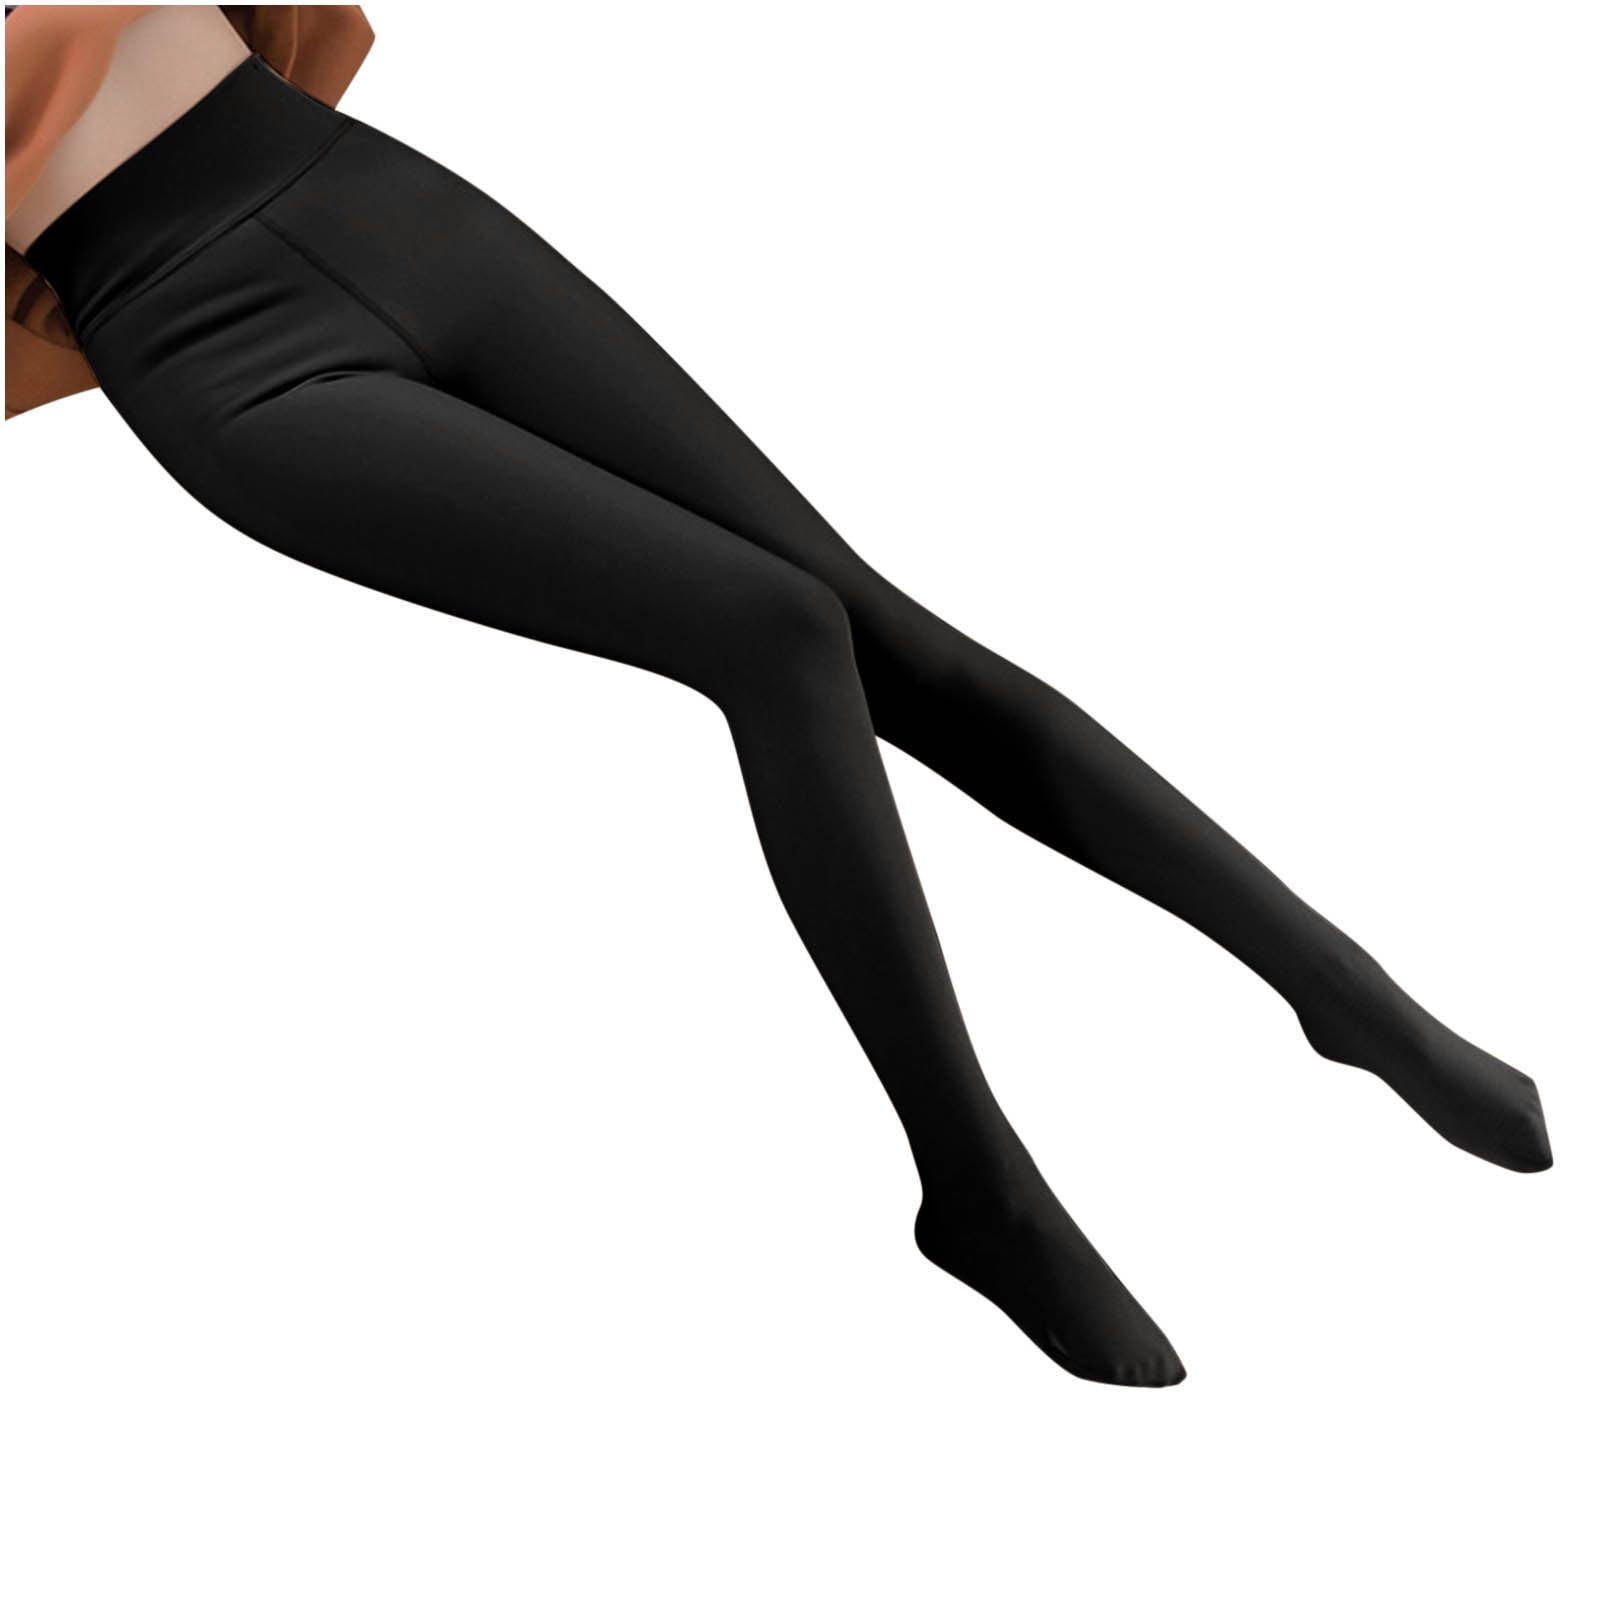 2 Pairs Tights for Women Winter Thermal Pantyhose Fake Translucent High  Waist Stockings Warm Fleece Lined Leggings 